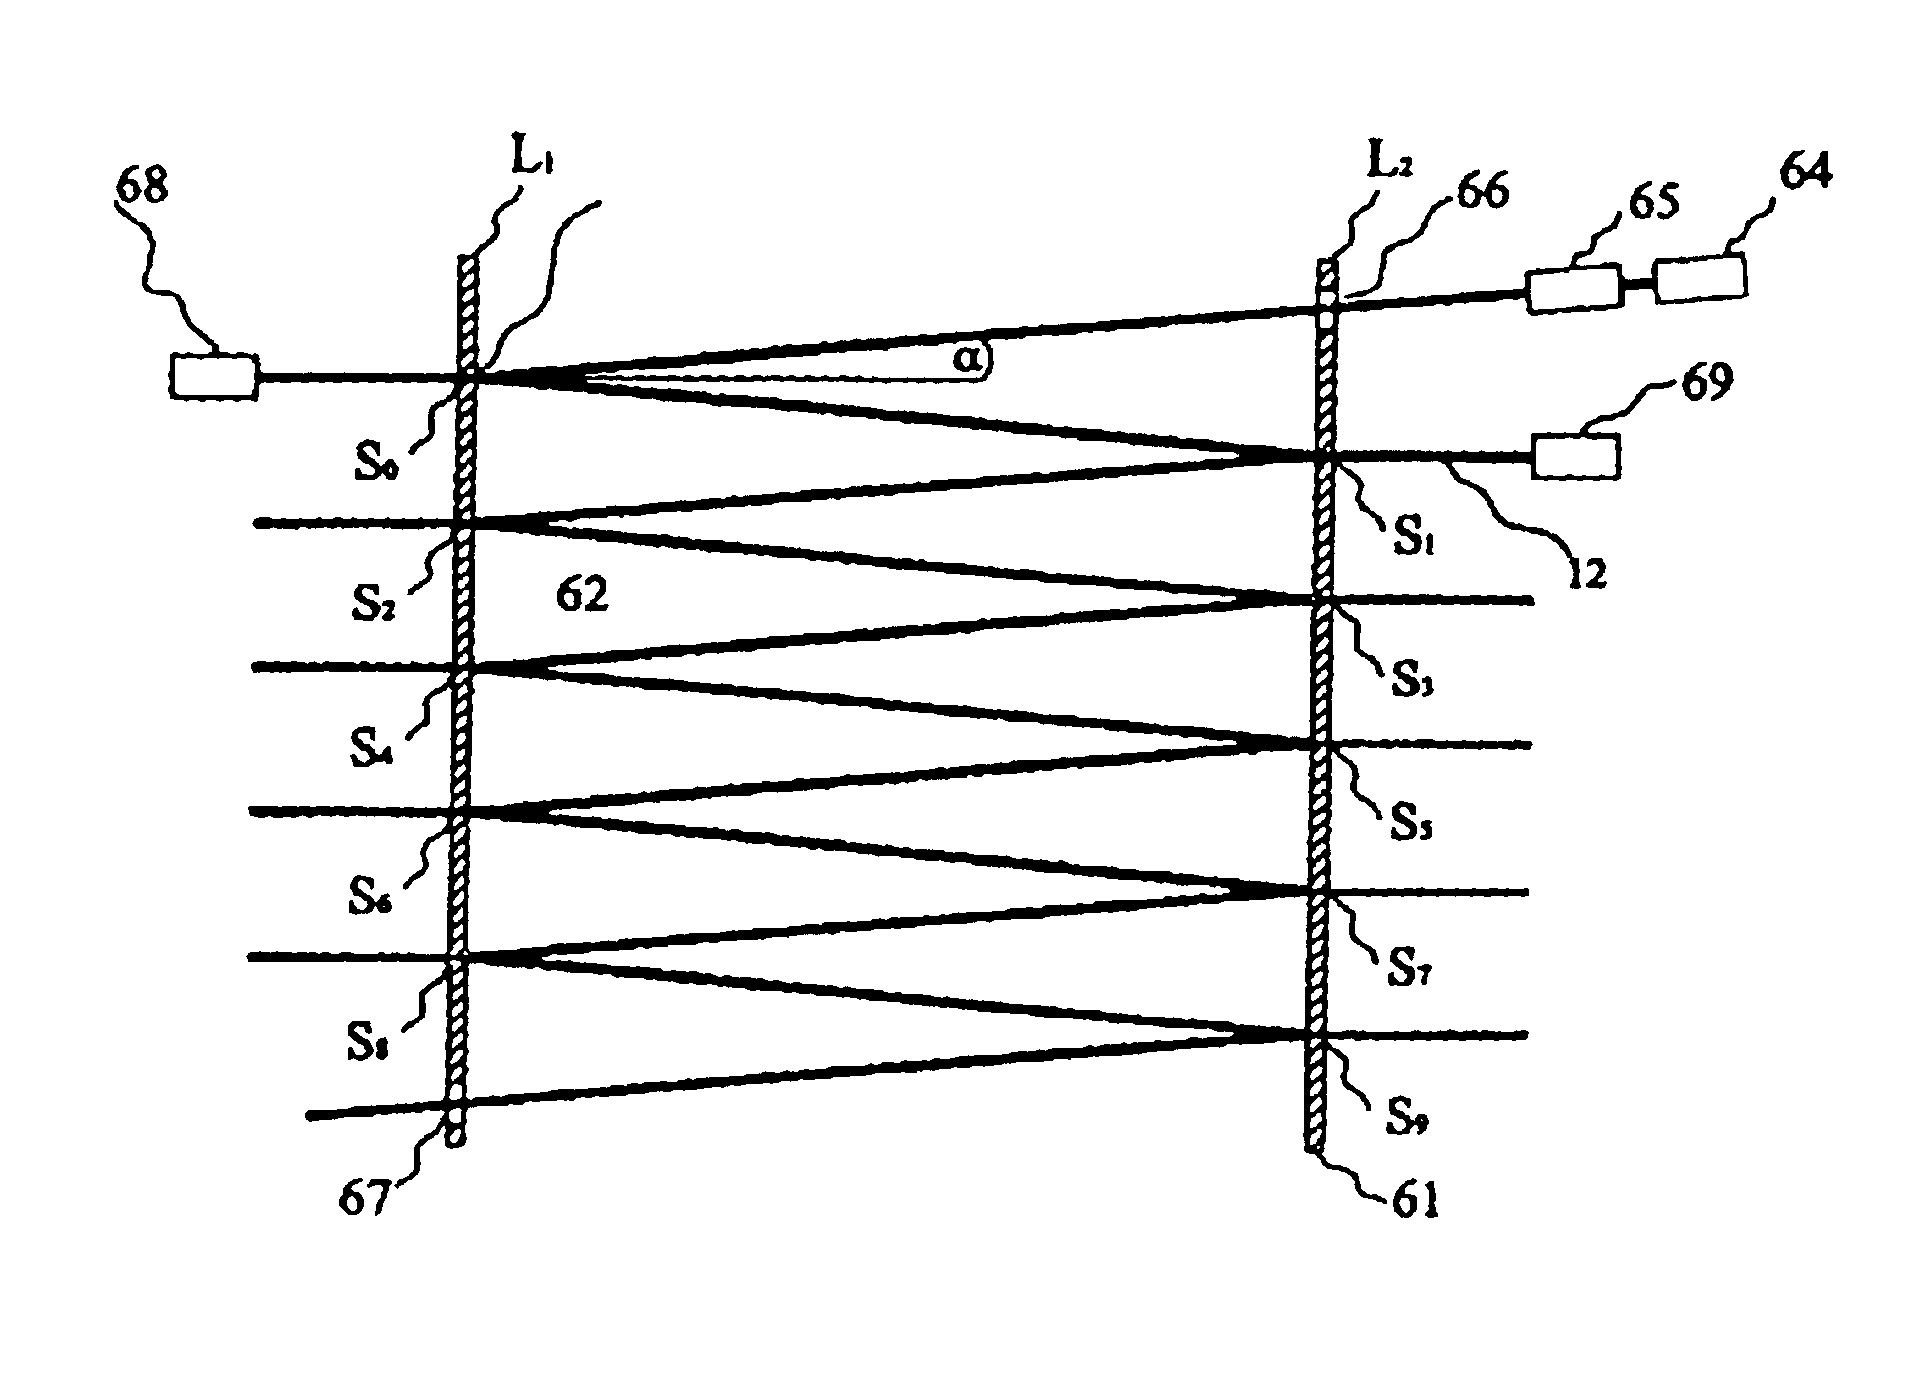 Apparatus and method for measuring decay in intensity of electromagnetic radiation in multipass spectrometry